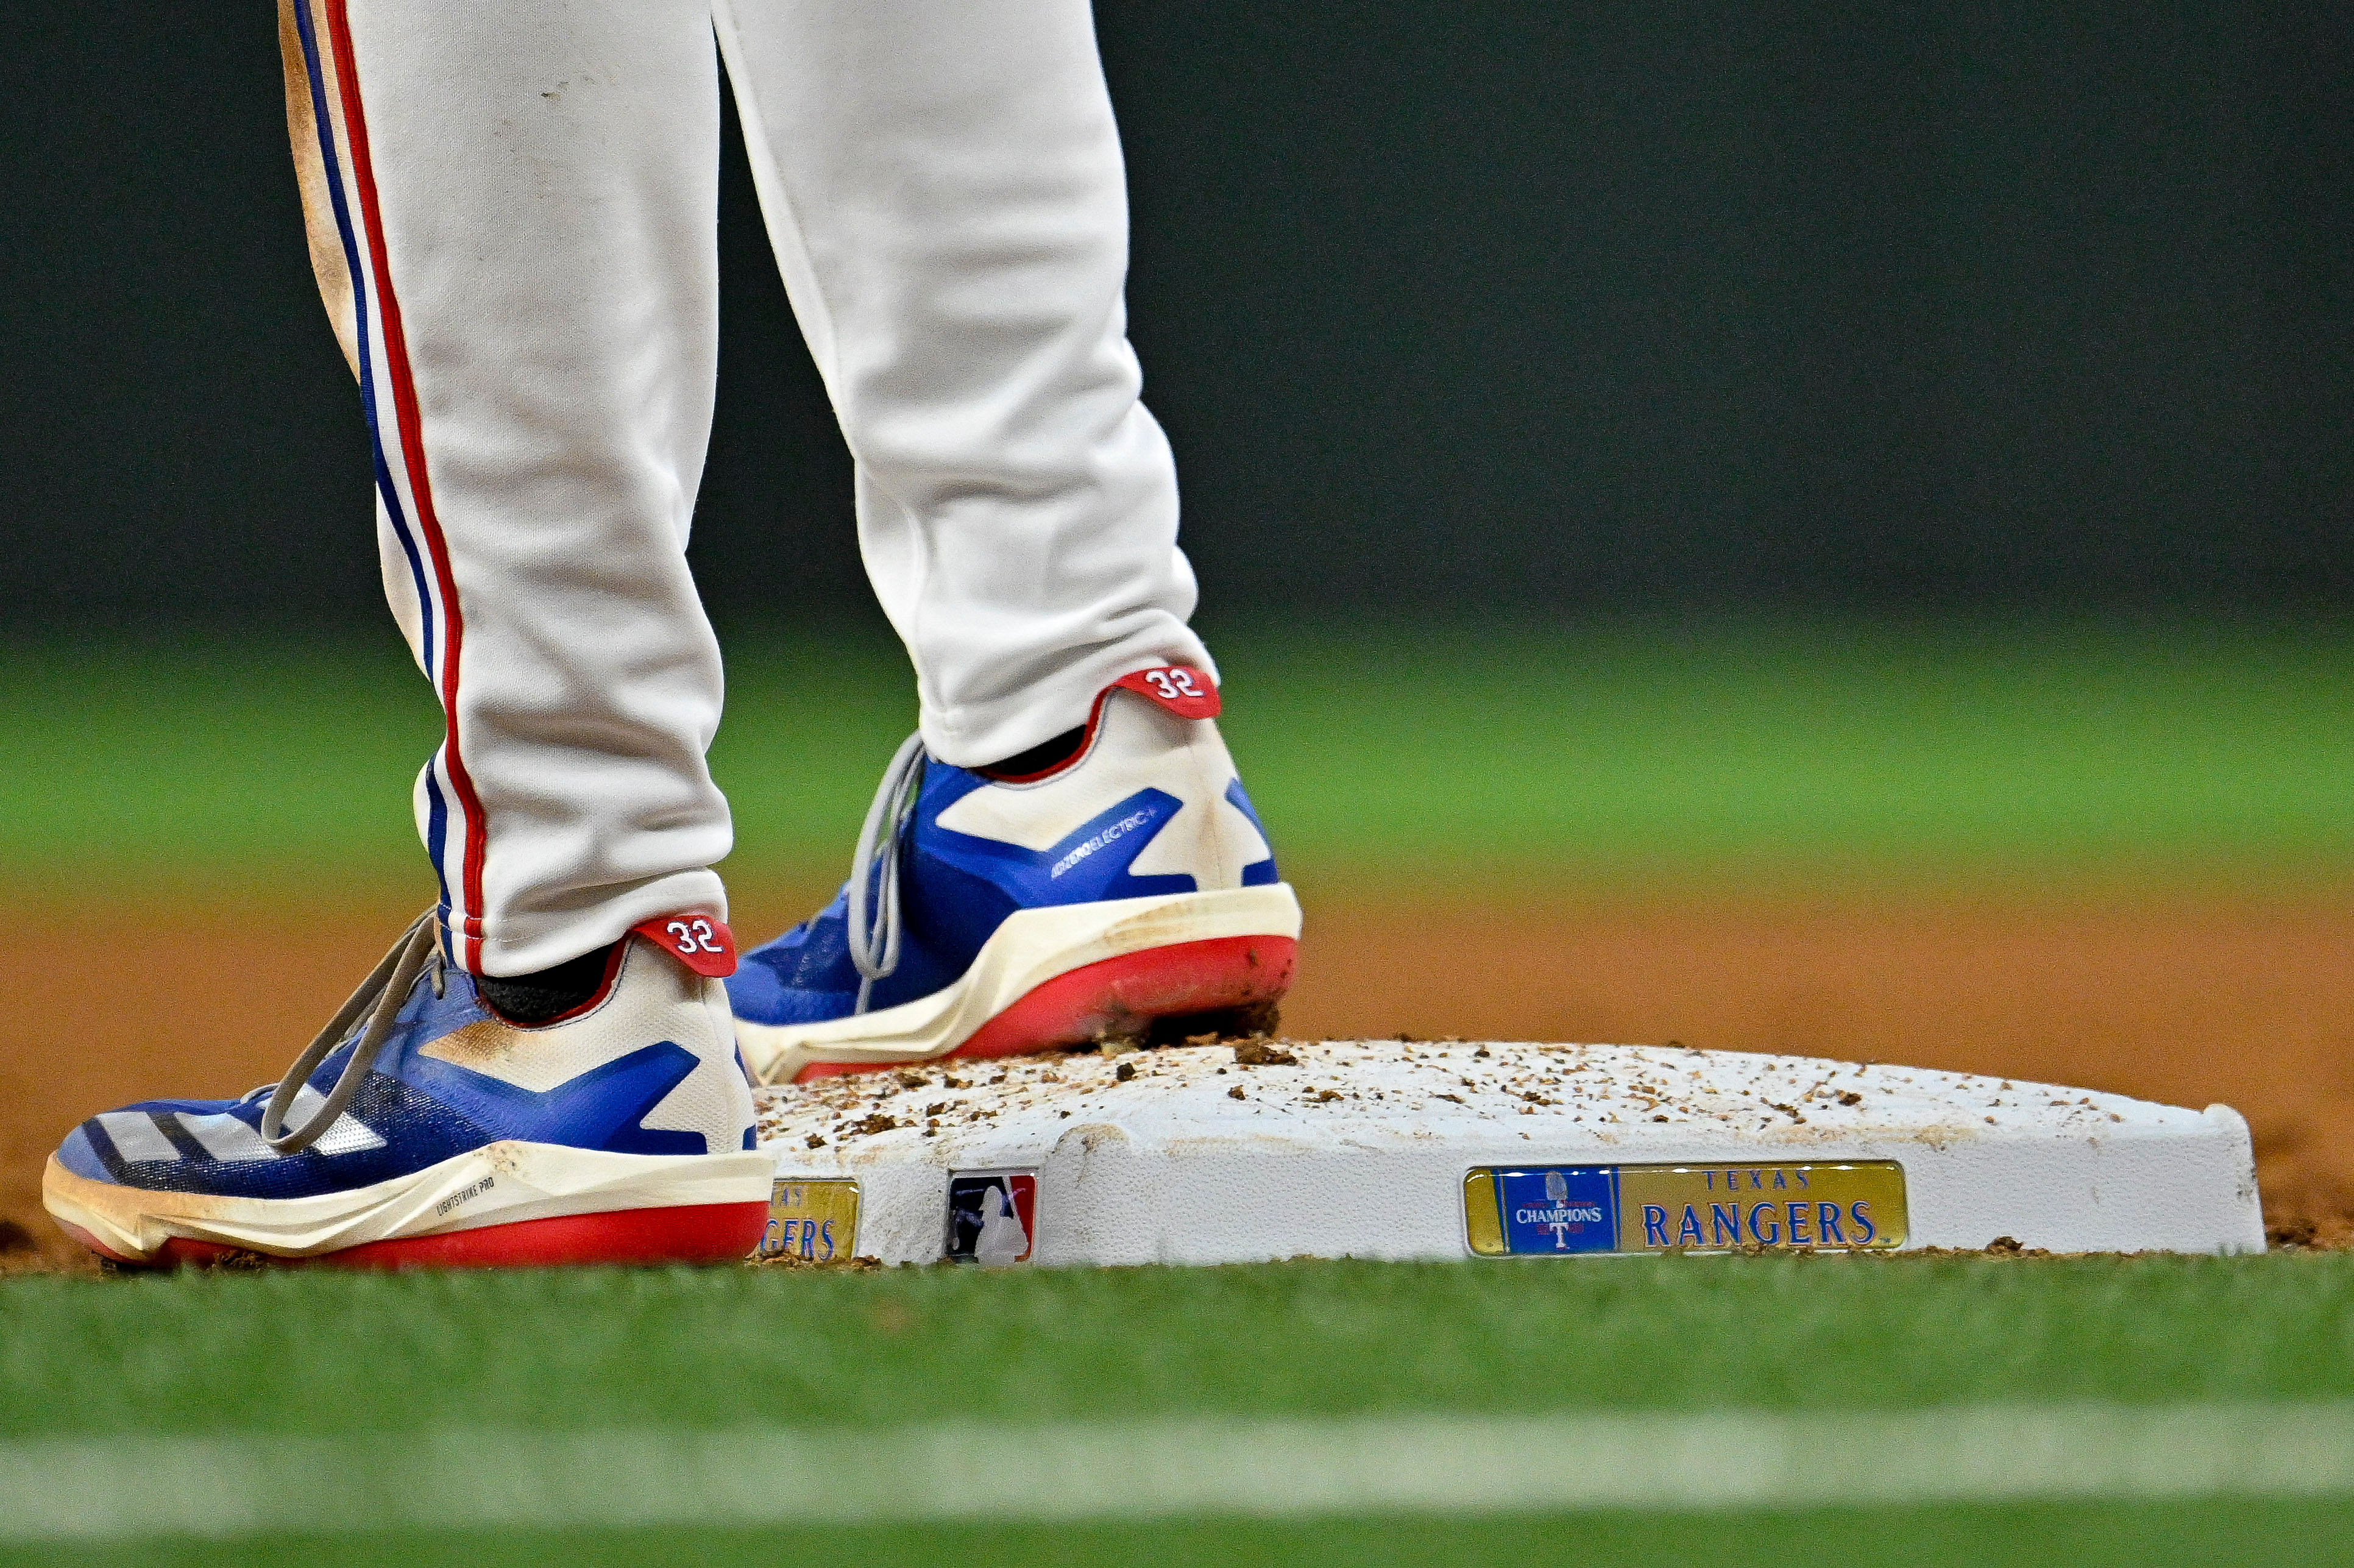 Chicago Cubs at Texas Rangers (Image via USA Today)